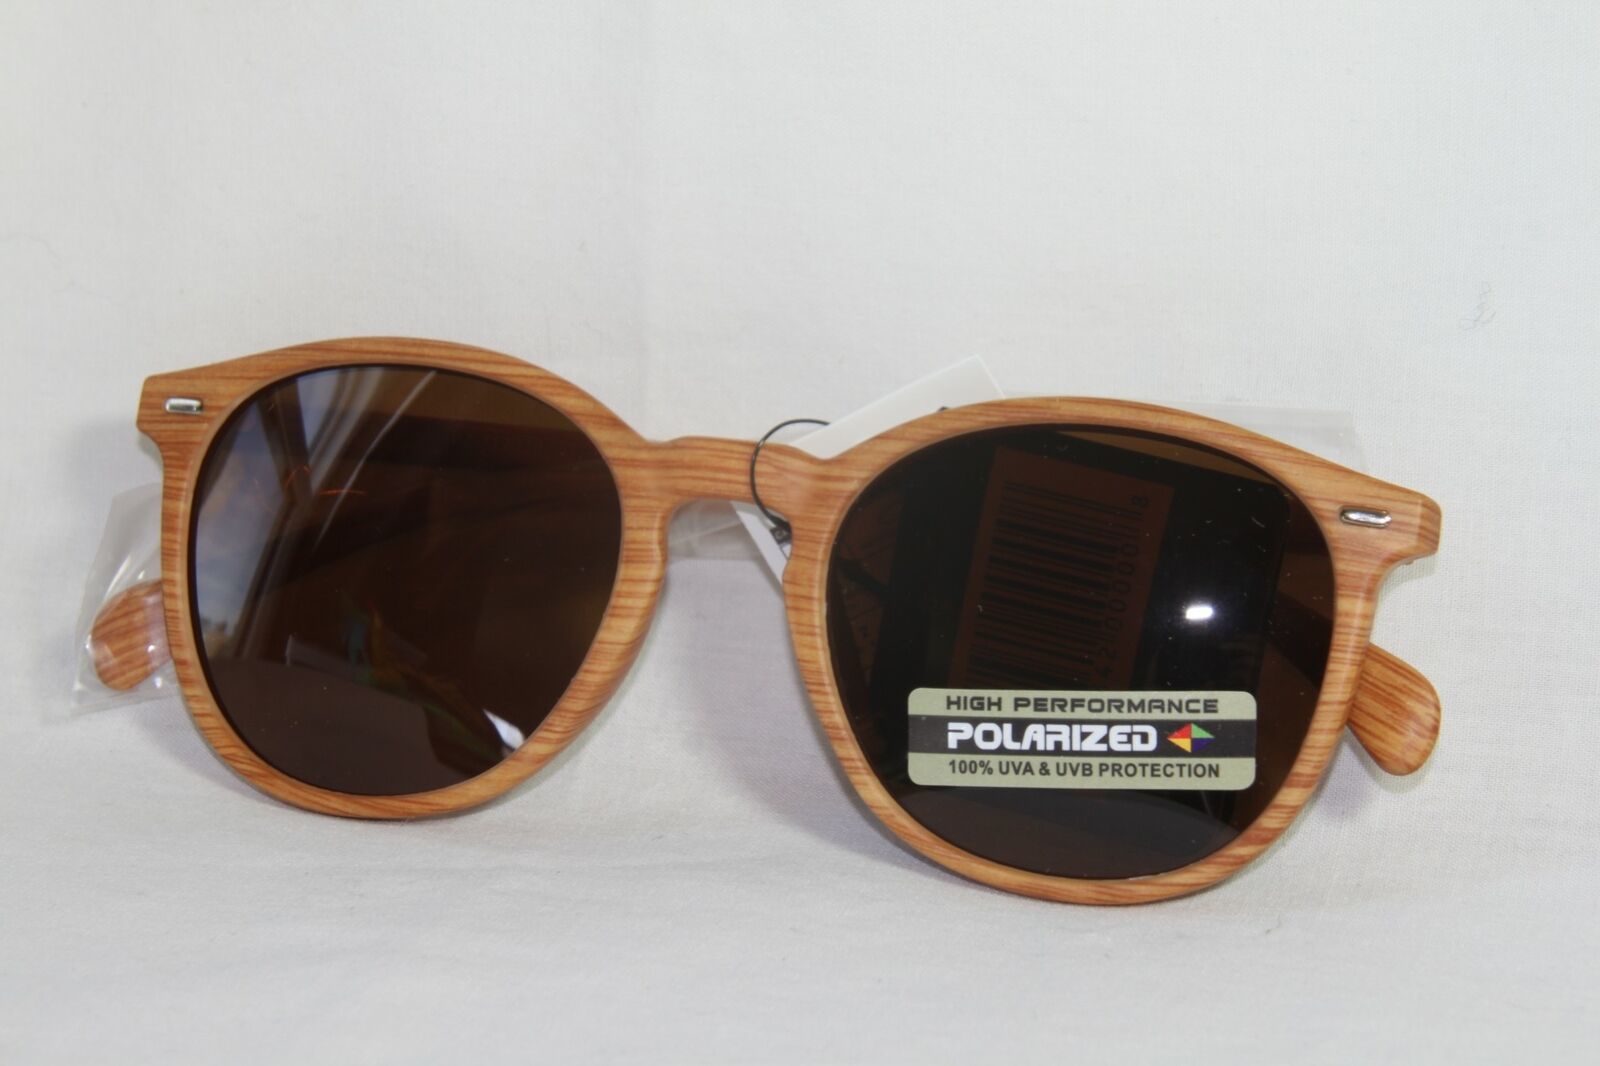 Primary image for Sunglasses (new) FAUX WOODEN SUNGLASSES - 100% UVA & UVB PROTECTION